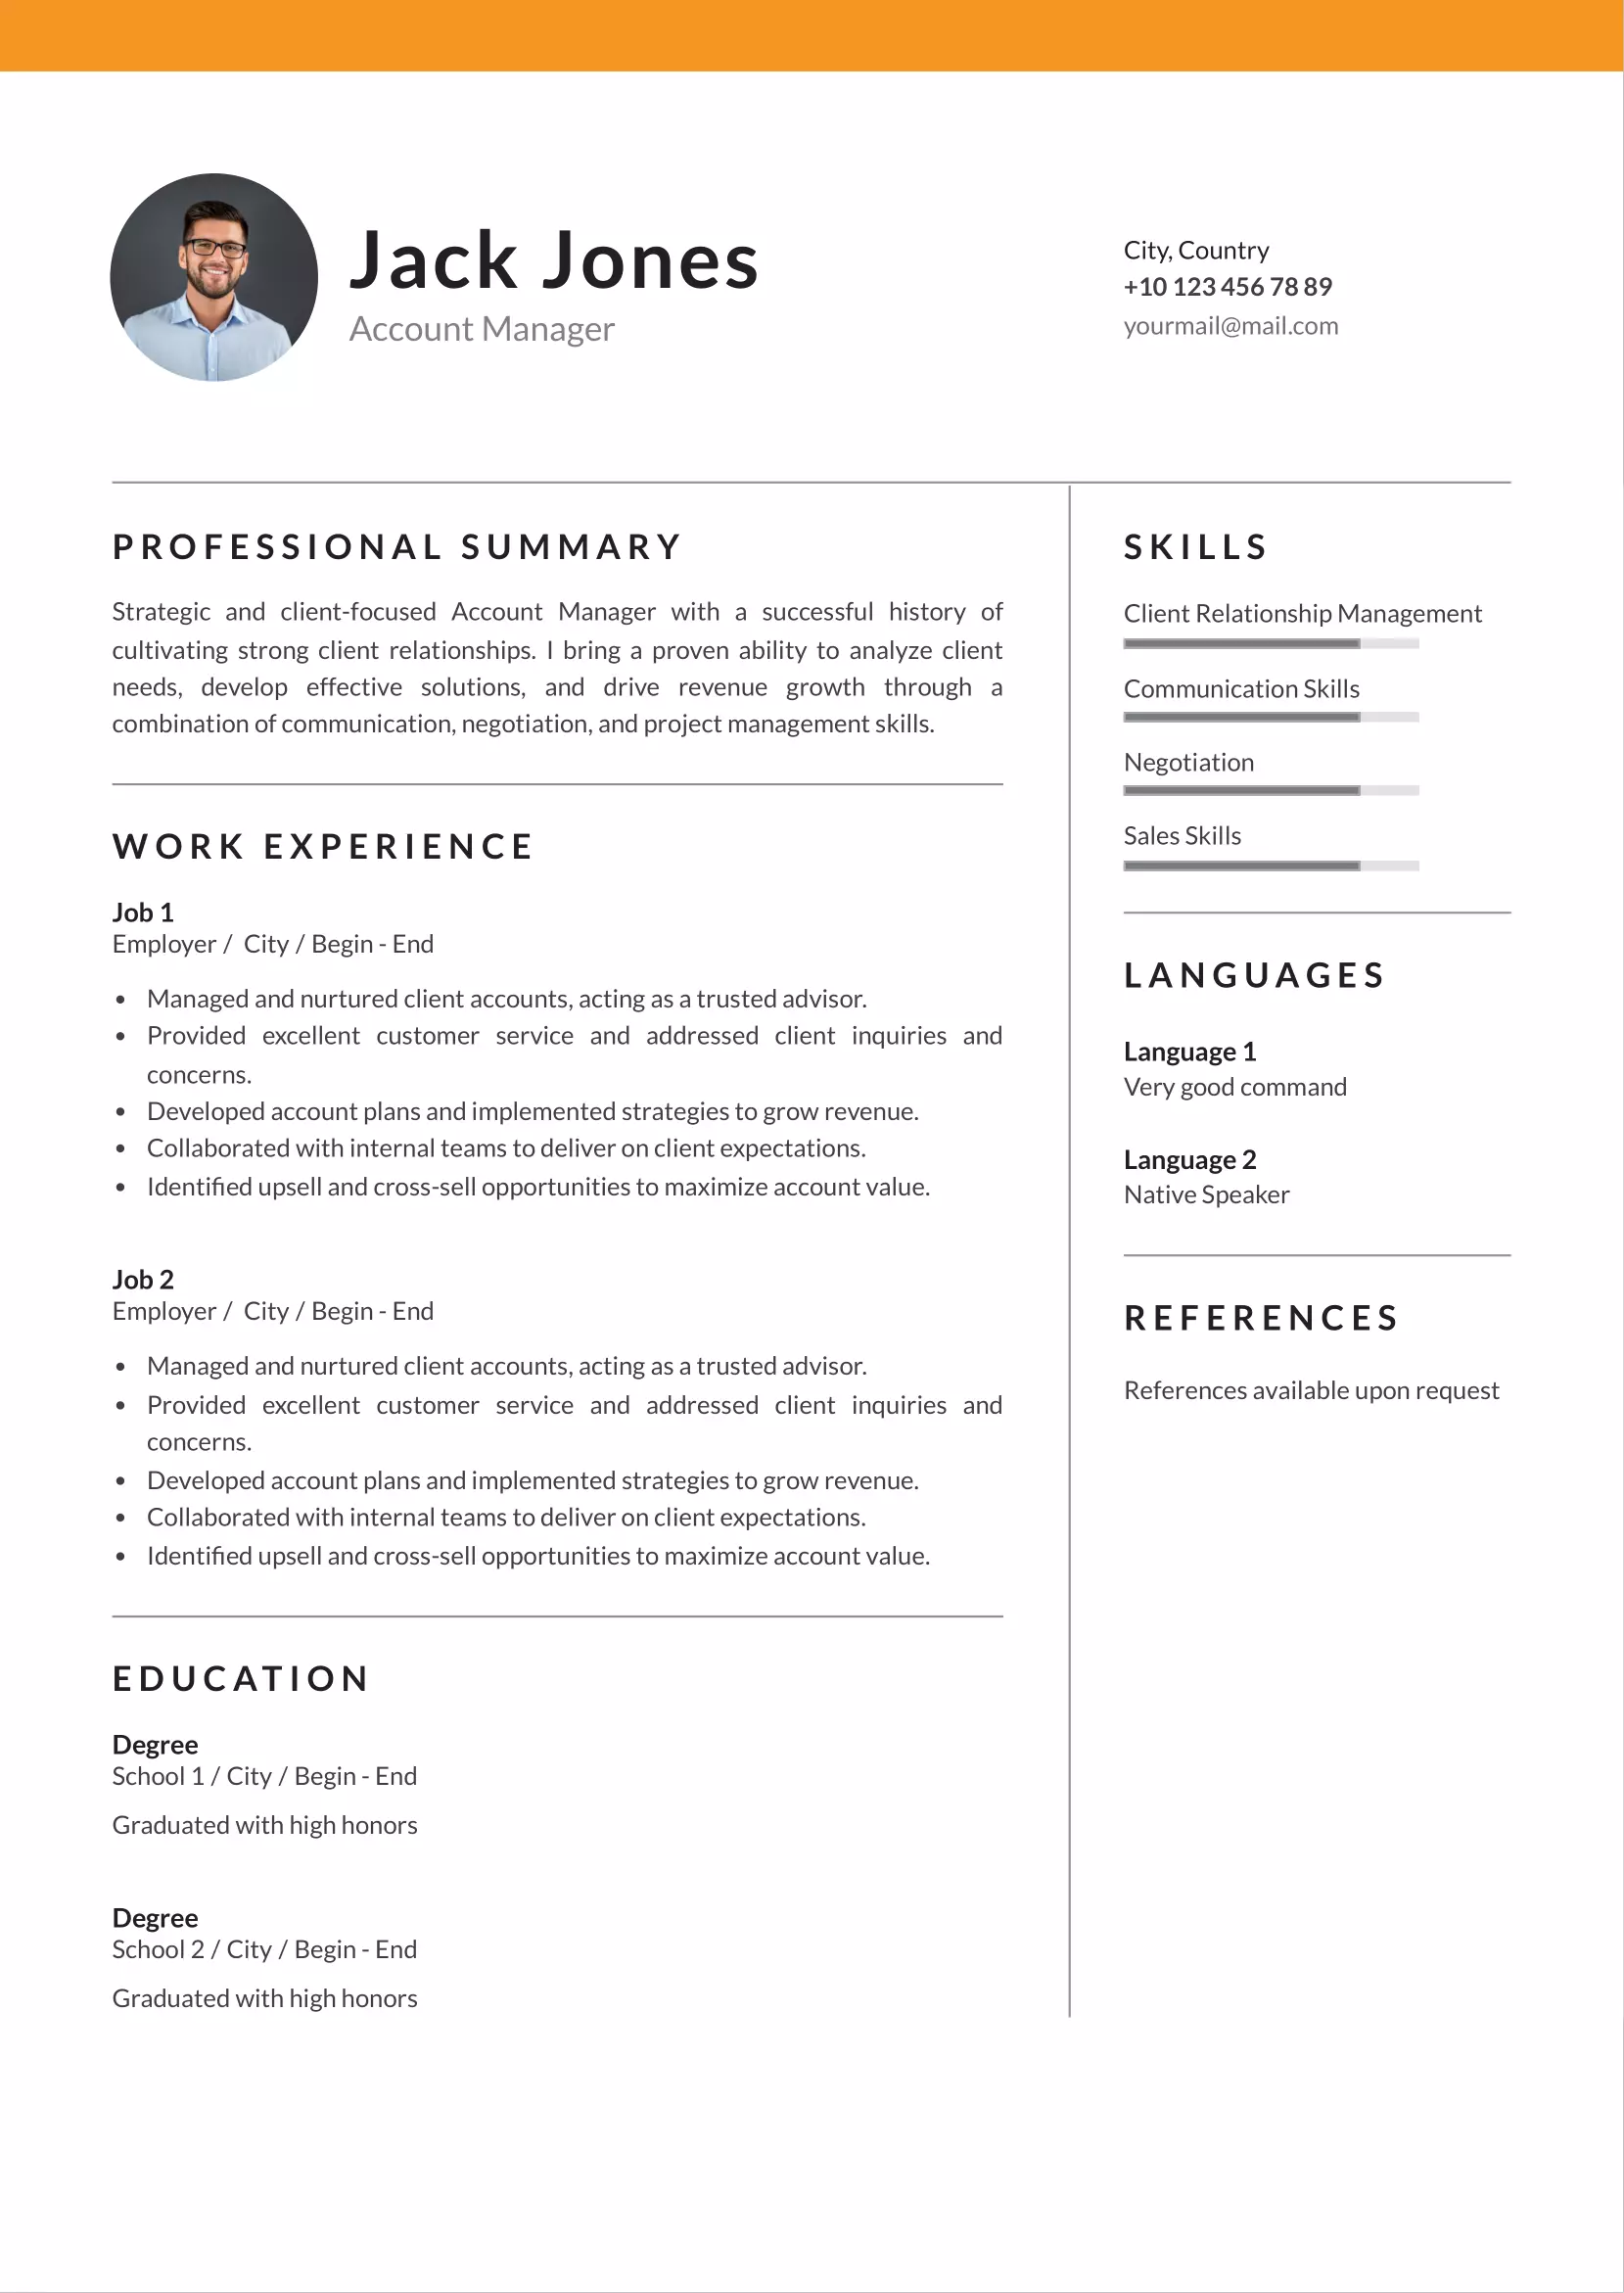 Account manager resume